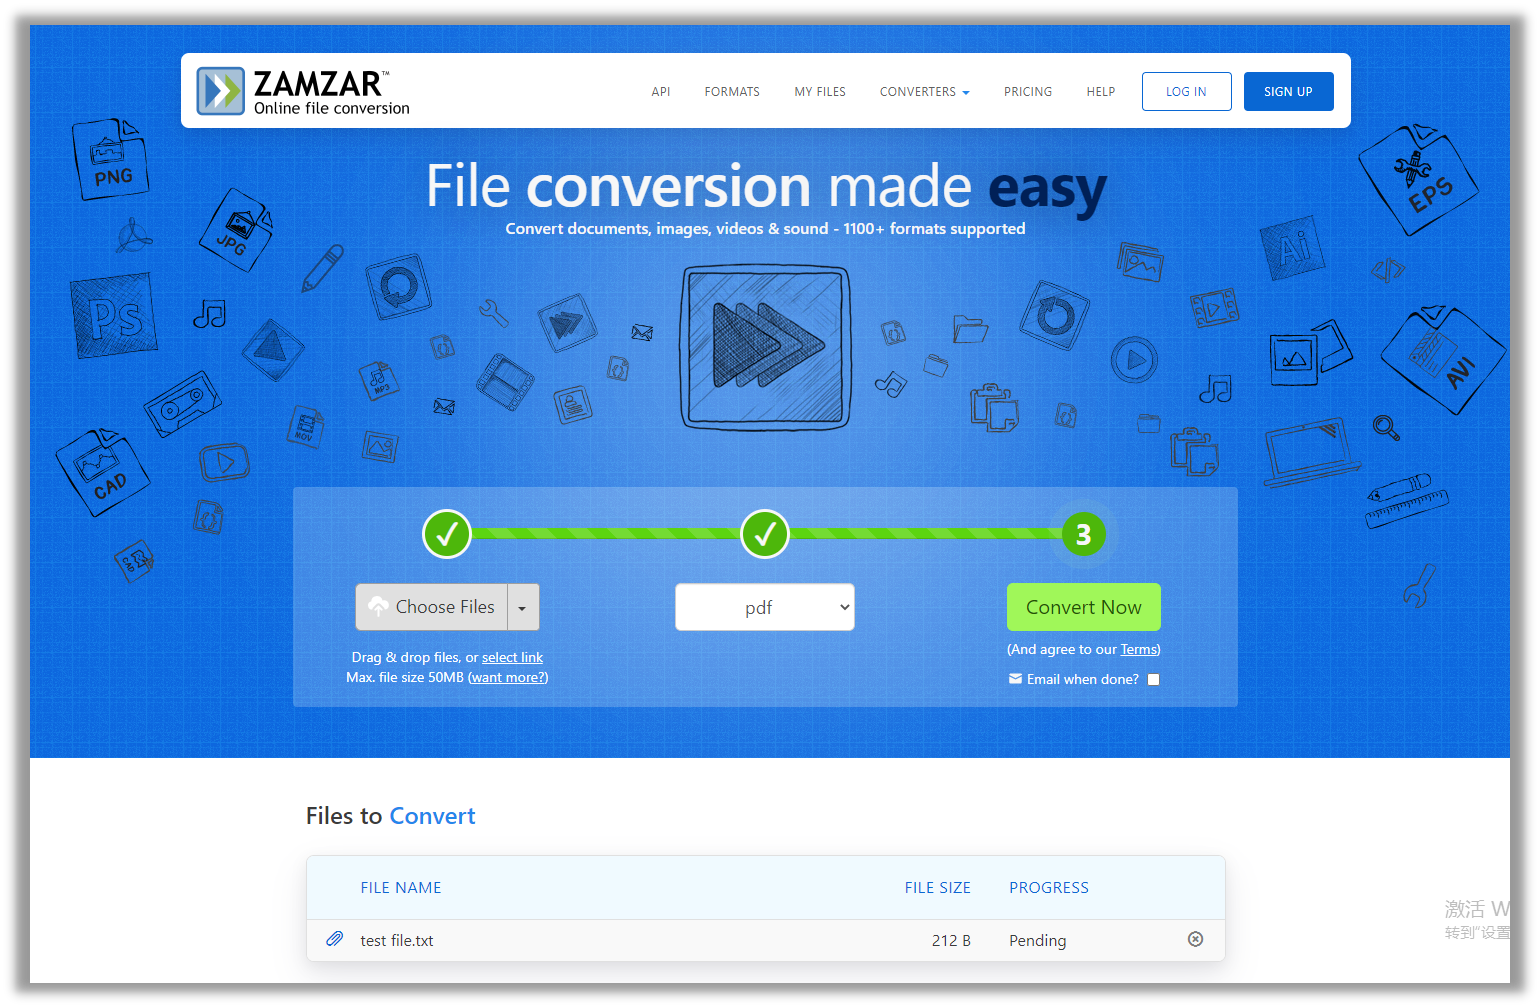 How to convert TXT to PDF in Zamzar